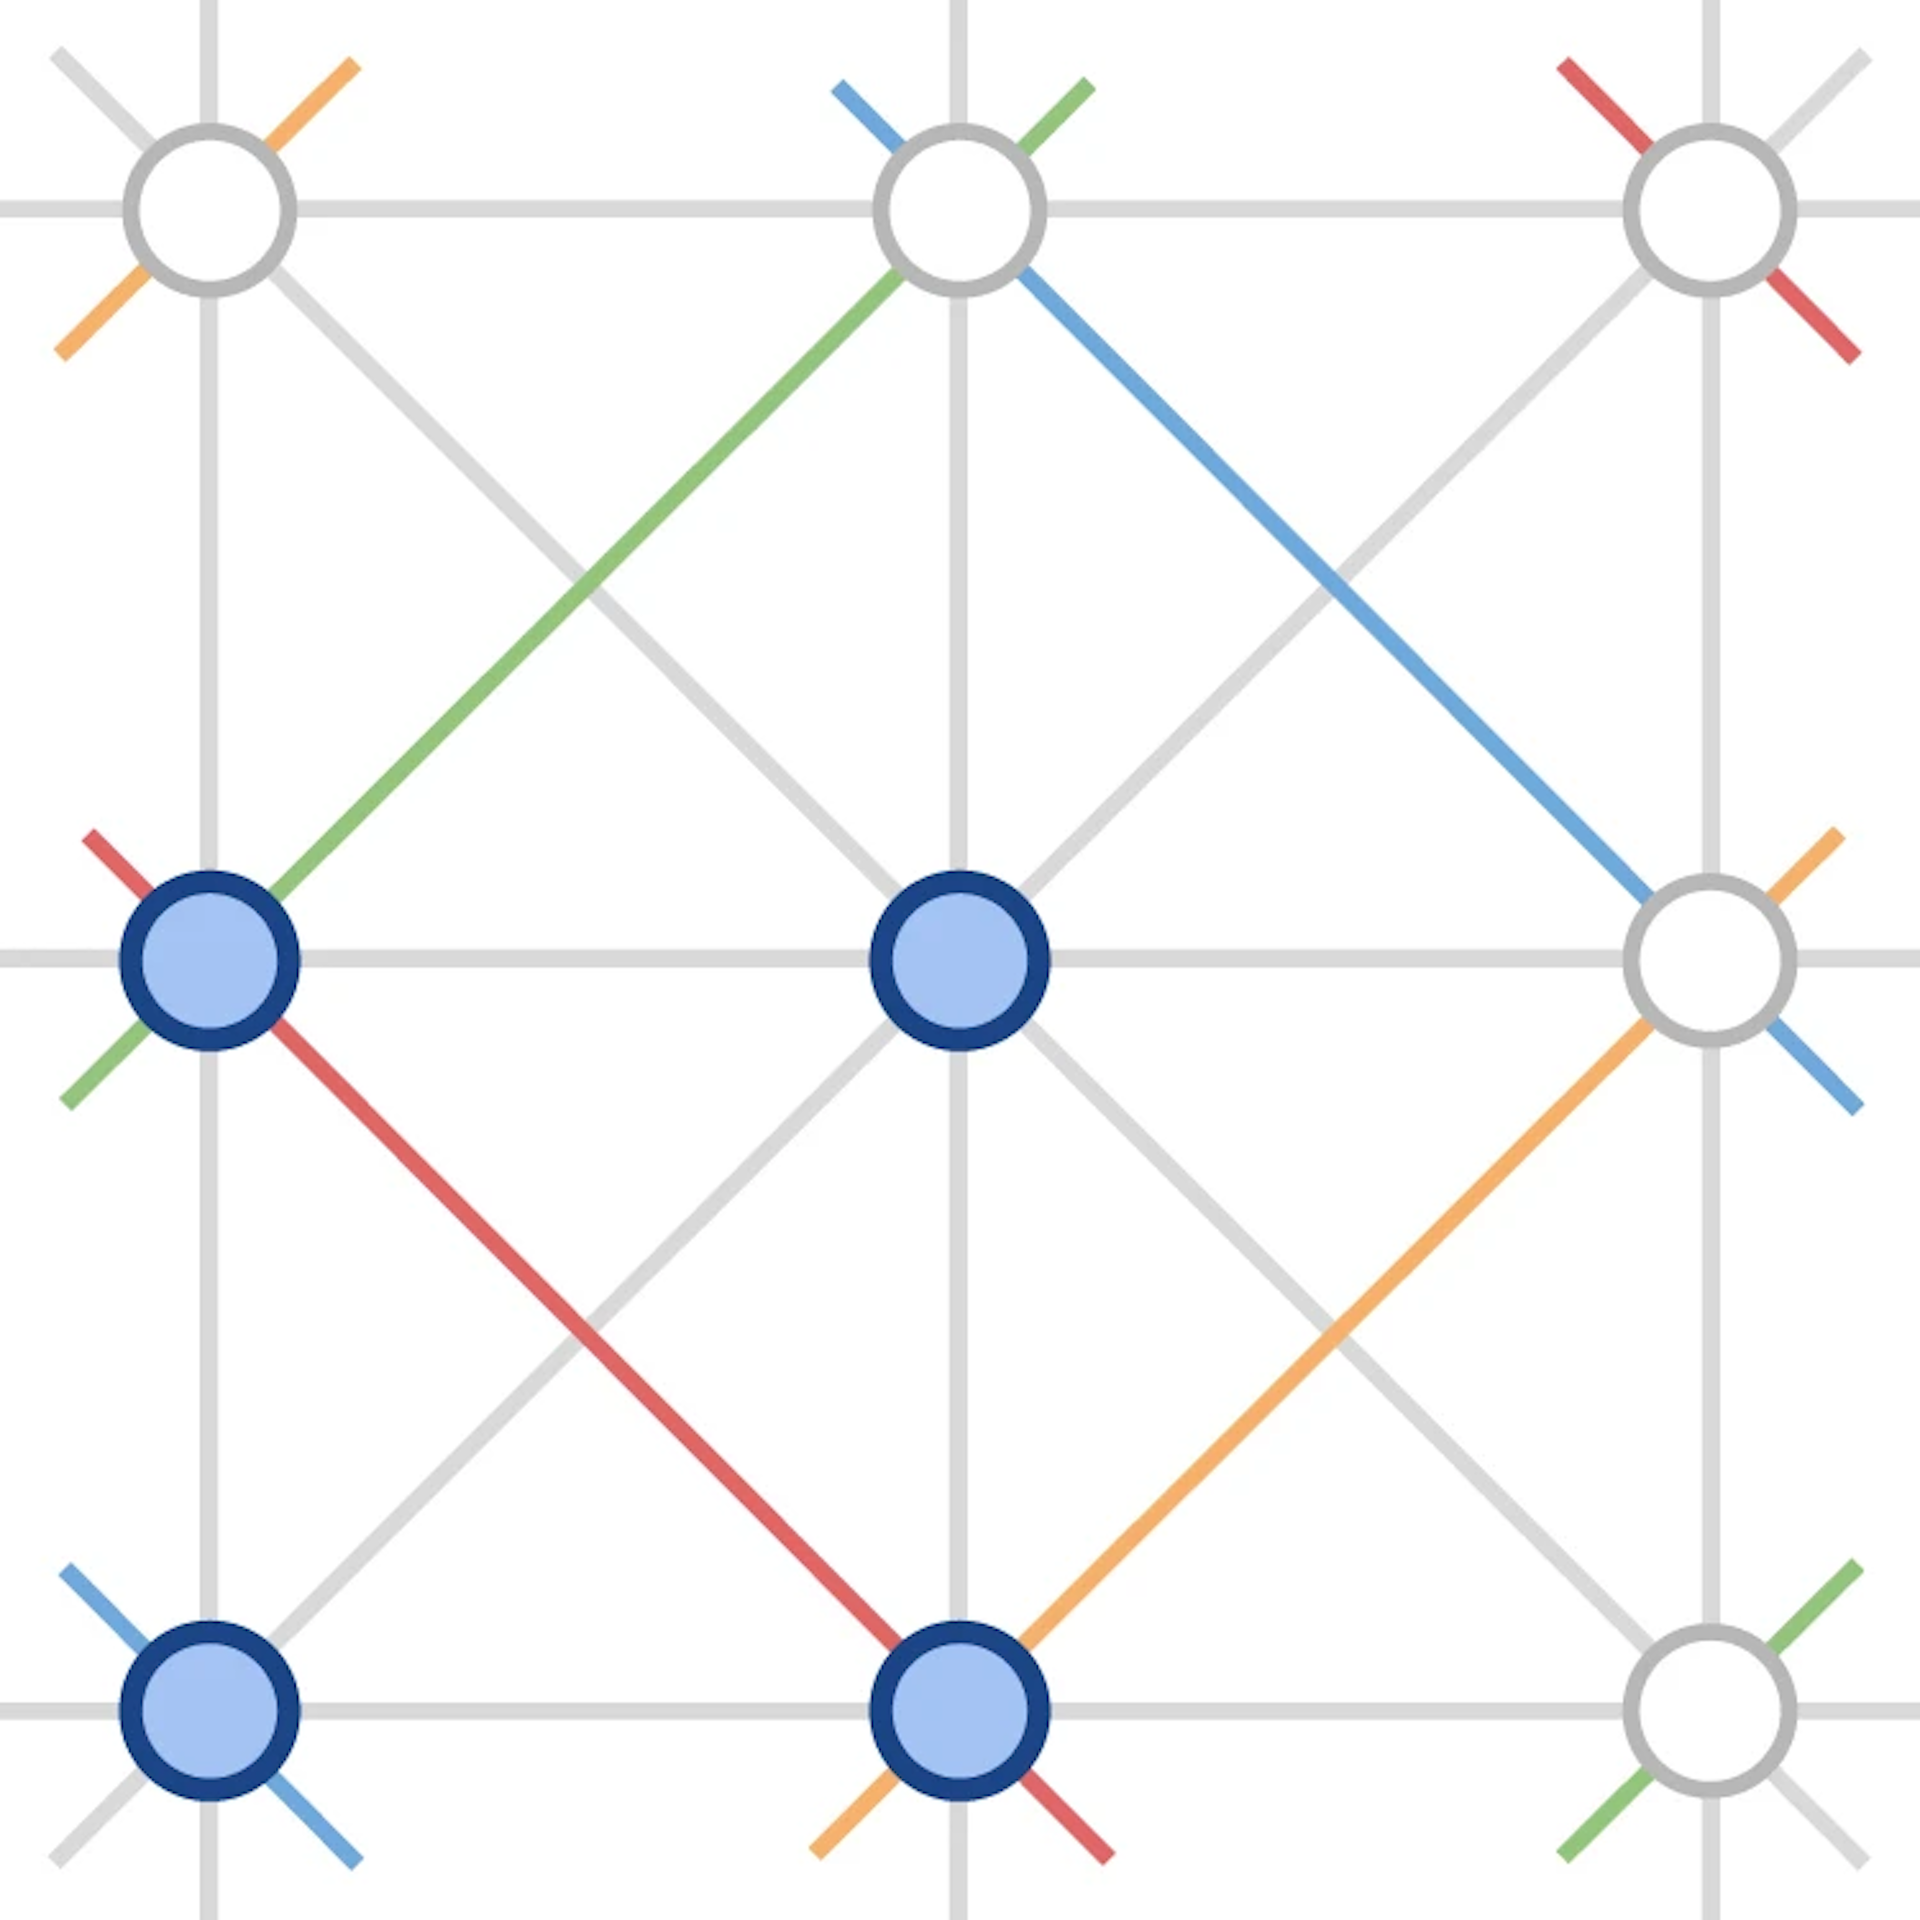 A diagram of a network with nodes connected by colored edges in a geometric arrangement.